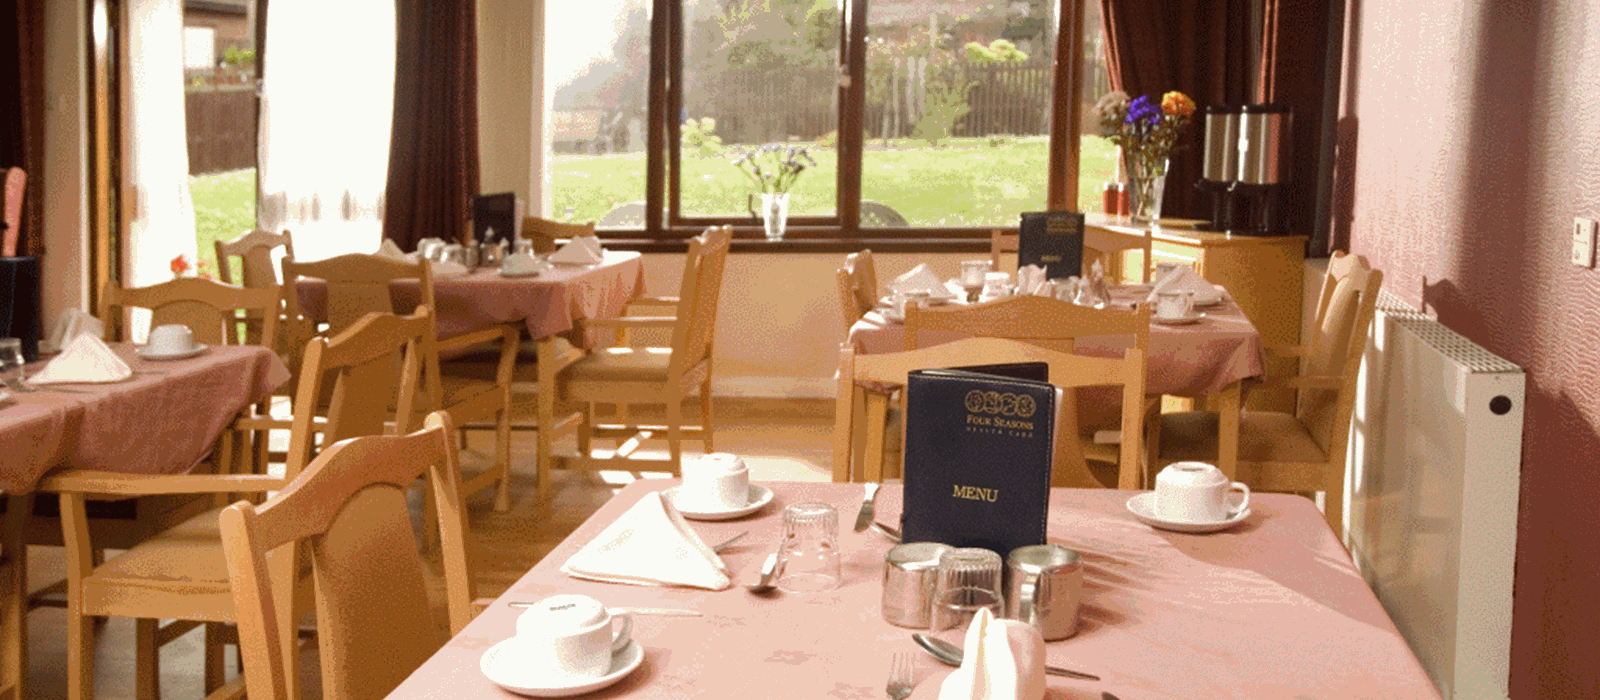 Dining Area of Benarty View Care Home in Fife, Scotland